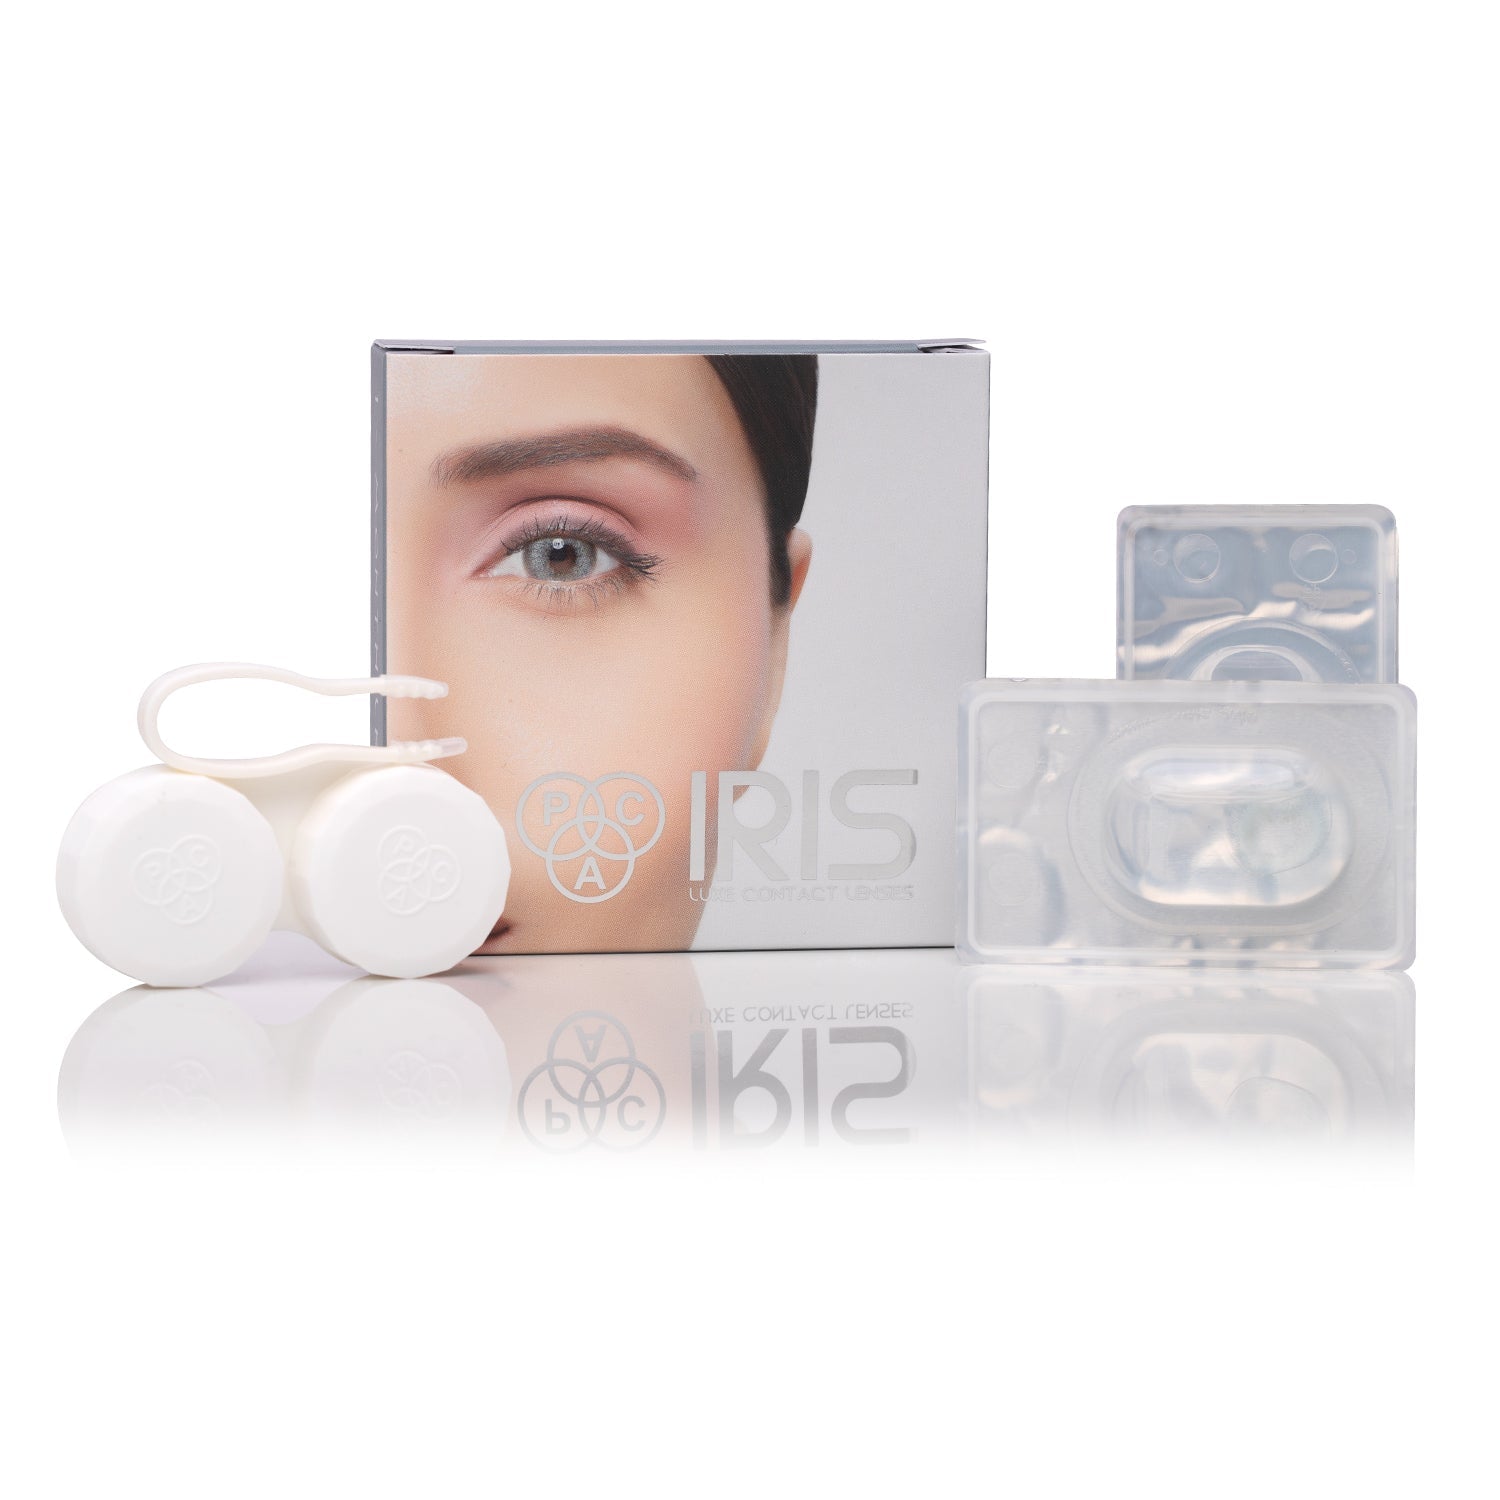 PAC Cosmetics IRIS LUXE One Month Lenses (1 Pair) #Color_Crystal